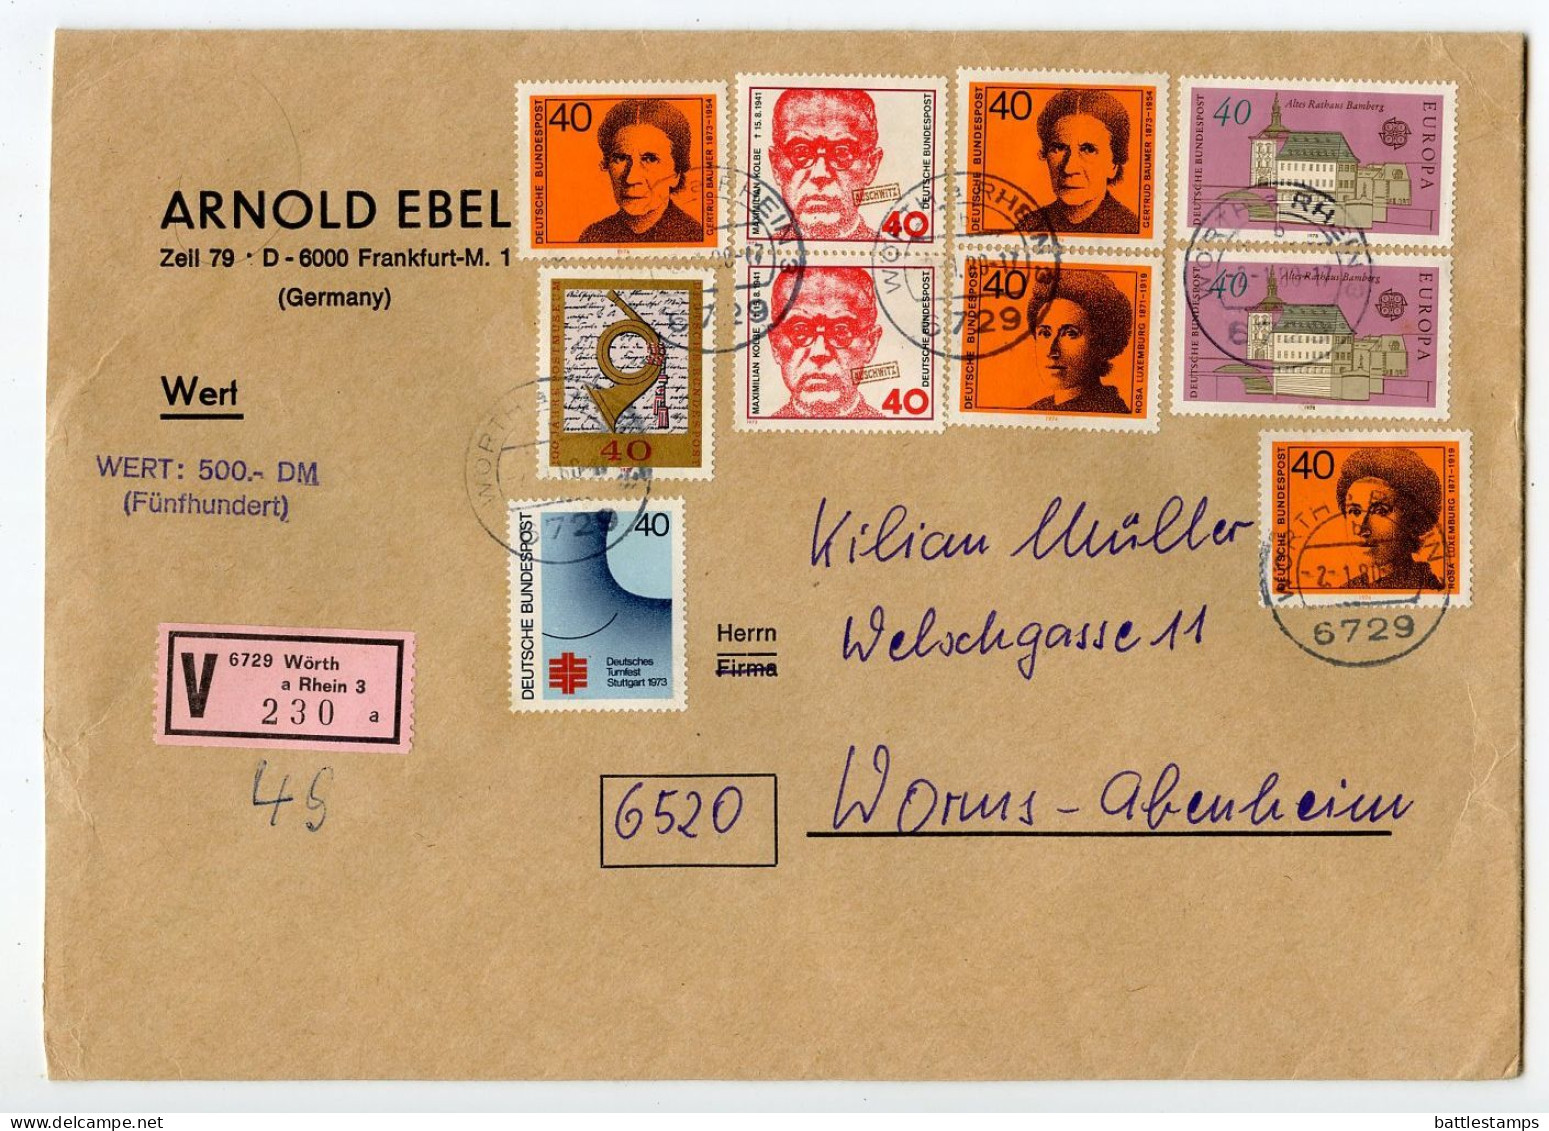 Germany, West 1980 Insured V-Label Cover; Wörth A Rhein To Worms-Abenheim; Mix Of Stamps - Covers & Documents